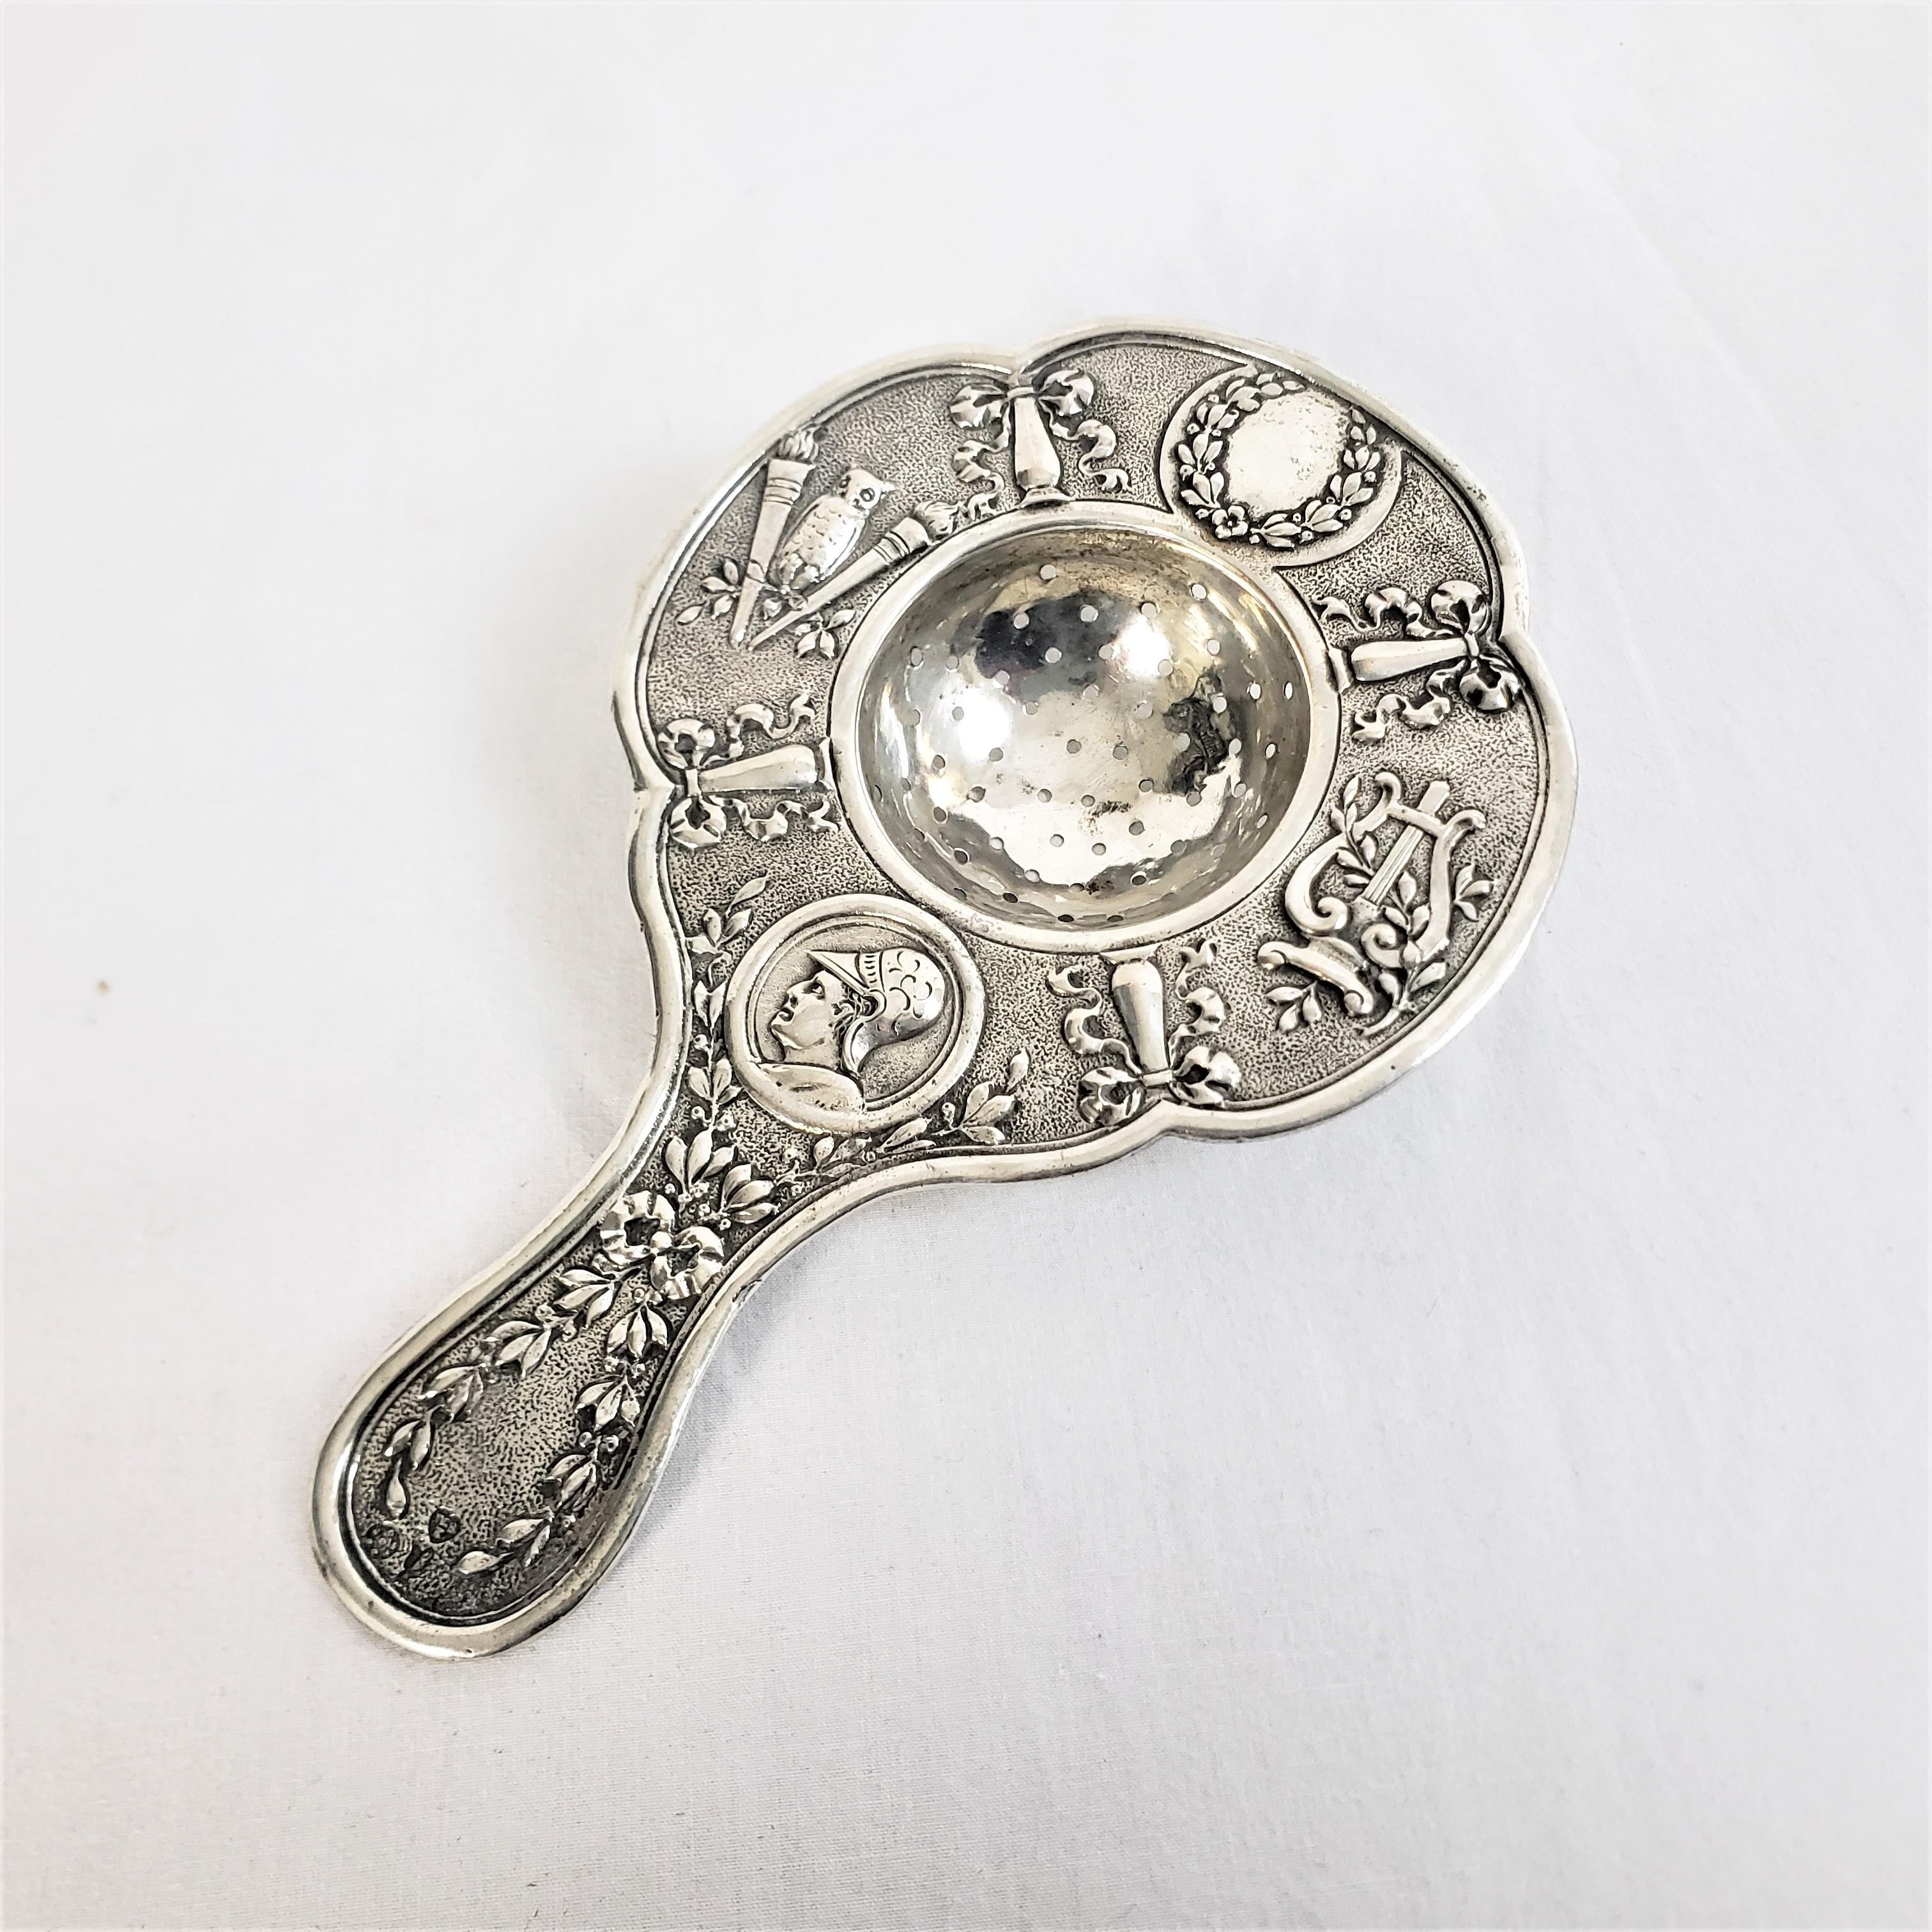 This antique tea strainer is hallmarked by an unknown maker, but originated from France and dates to approximately 1890 and done in a period Victorian style. The strainer is composed of Continental or .800 plus silver and is decorated with a raised